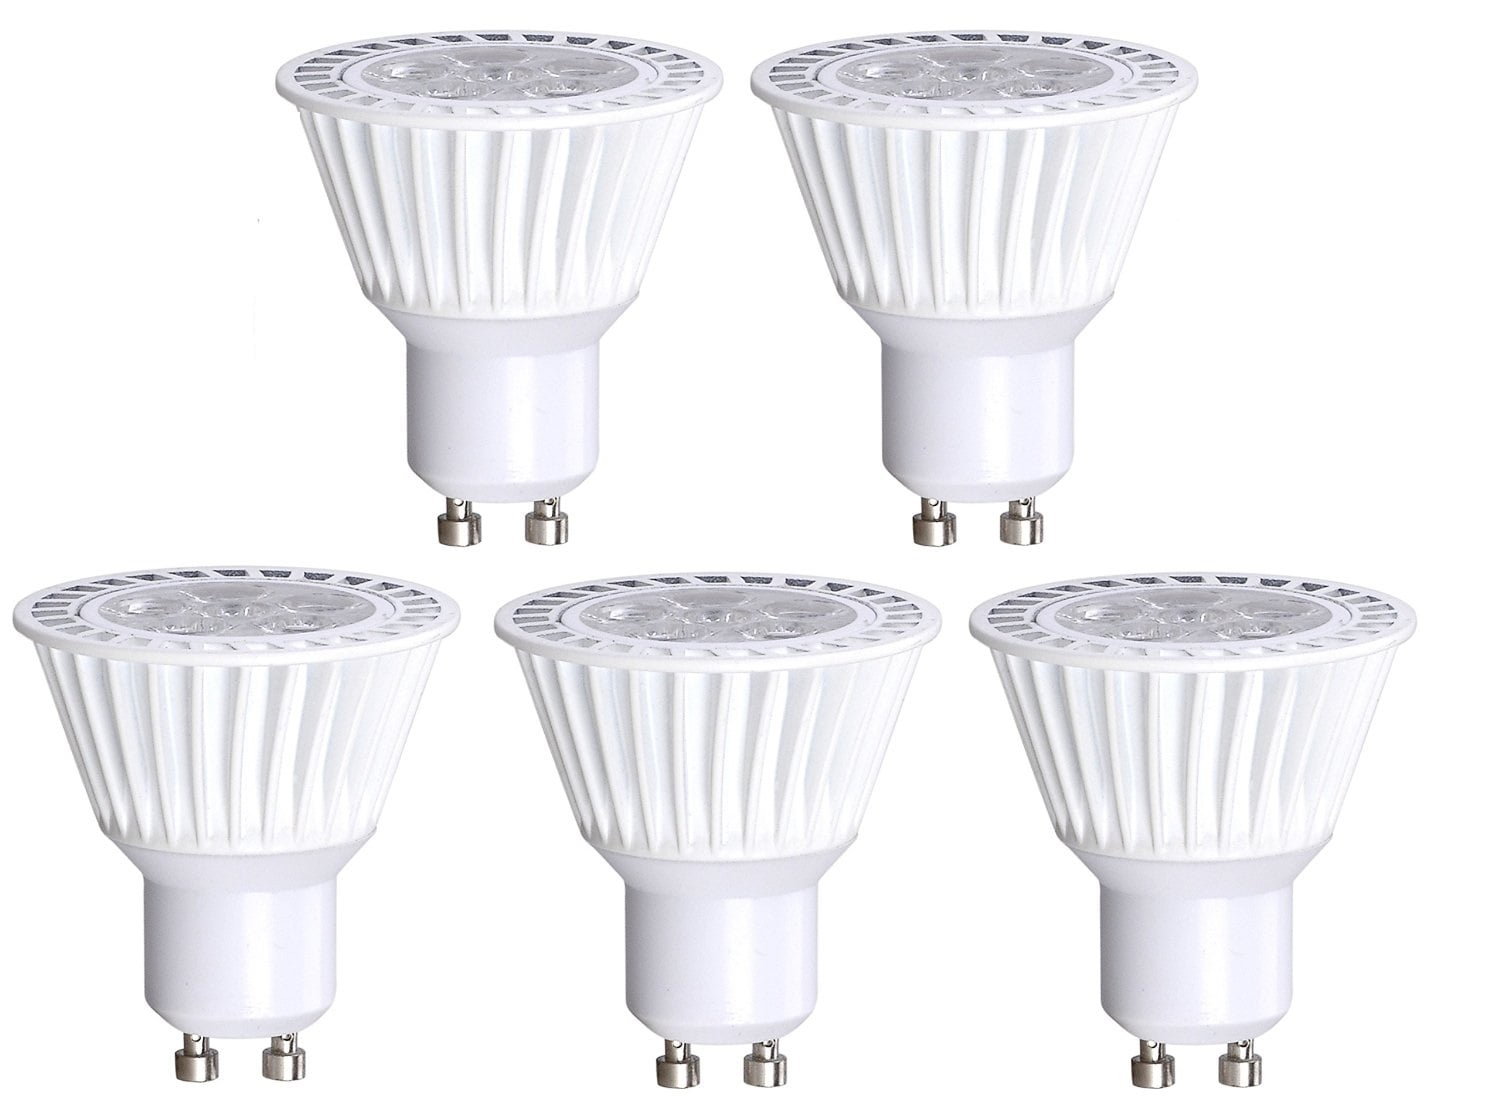 Vurdering cabriolet Uganda 5 Pack Bioluz LED GU10 LED Bulb 50W Replacement (Uses only 6.5 watts) Dimmable  3000K 120v UL Listed - Walmart.com